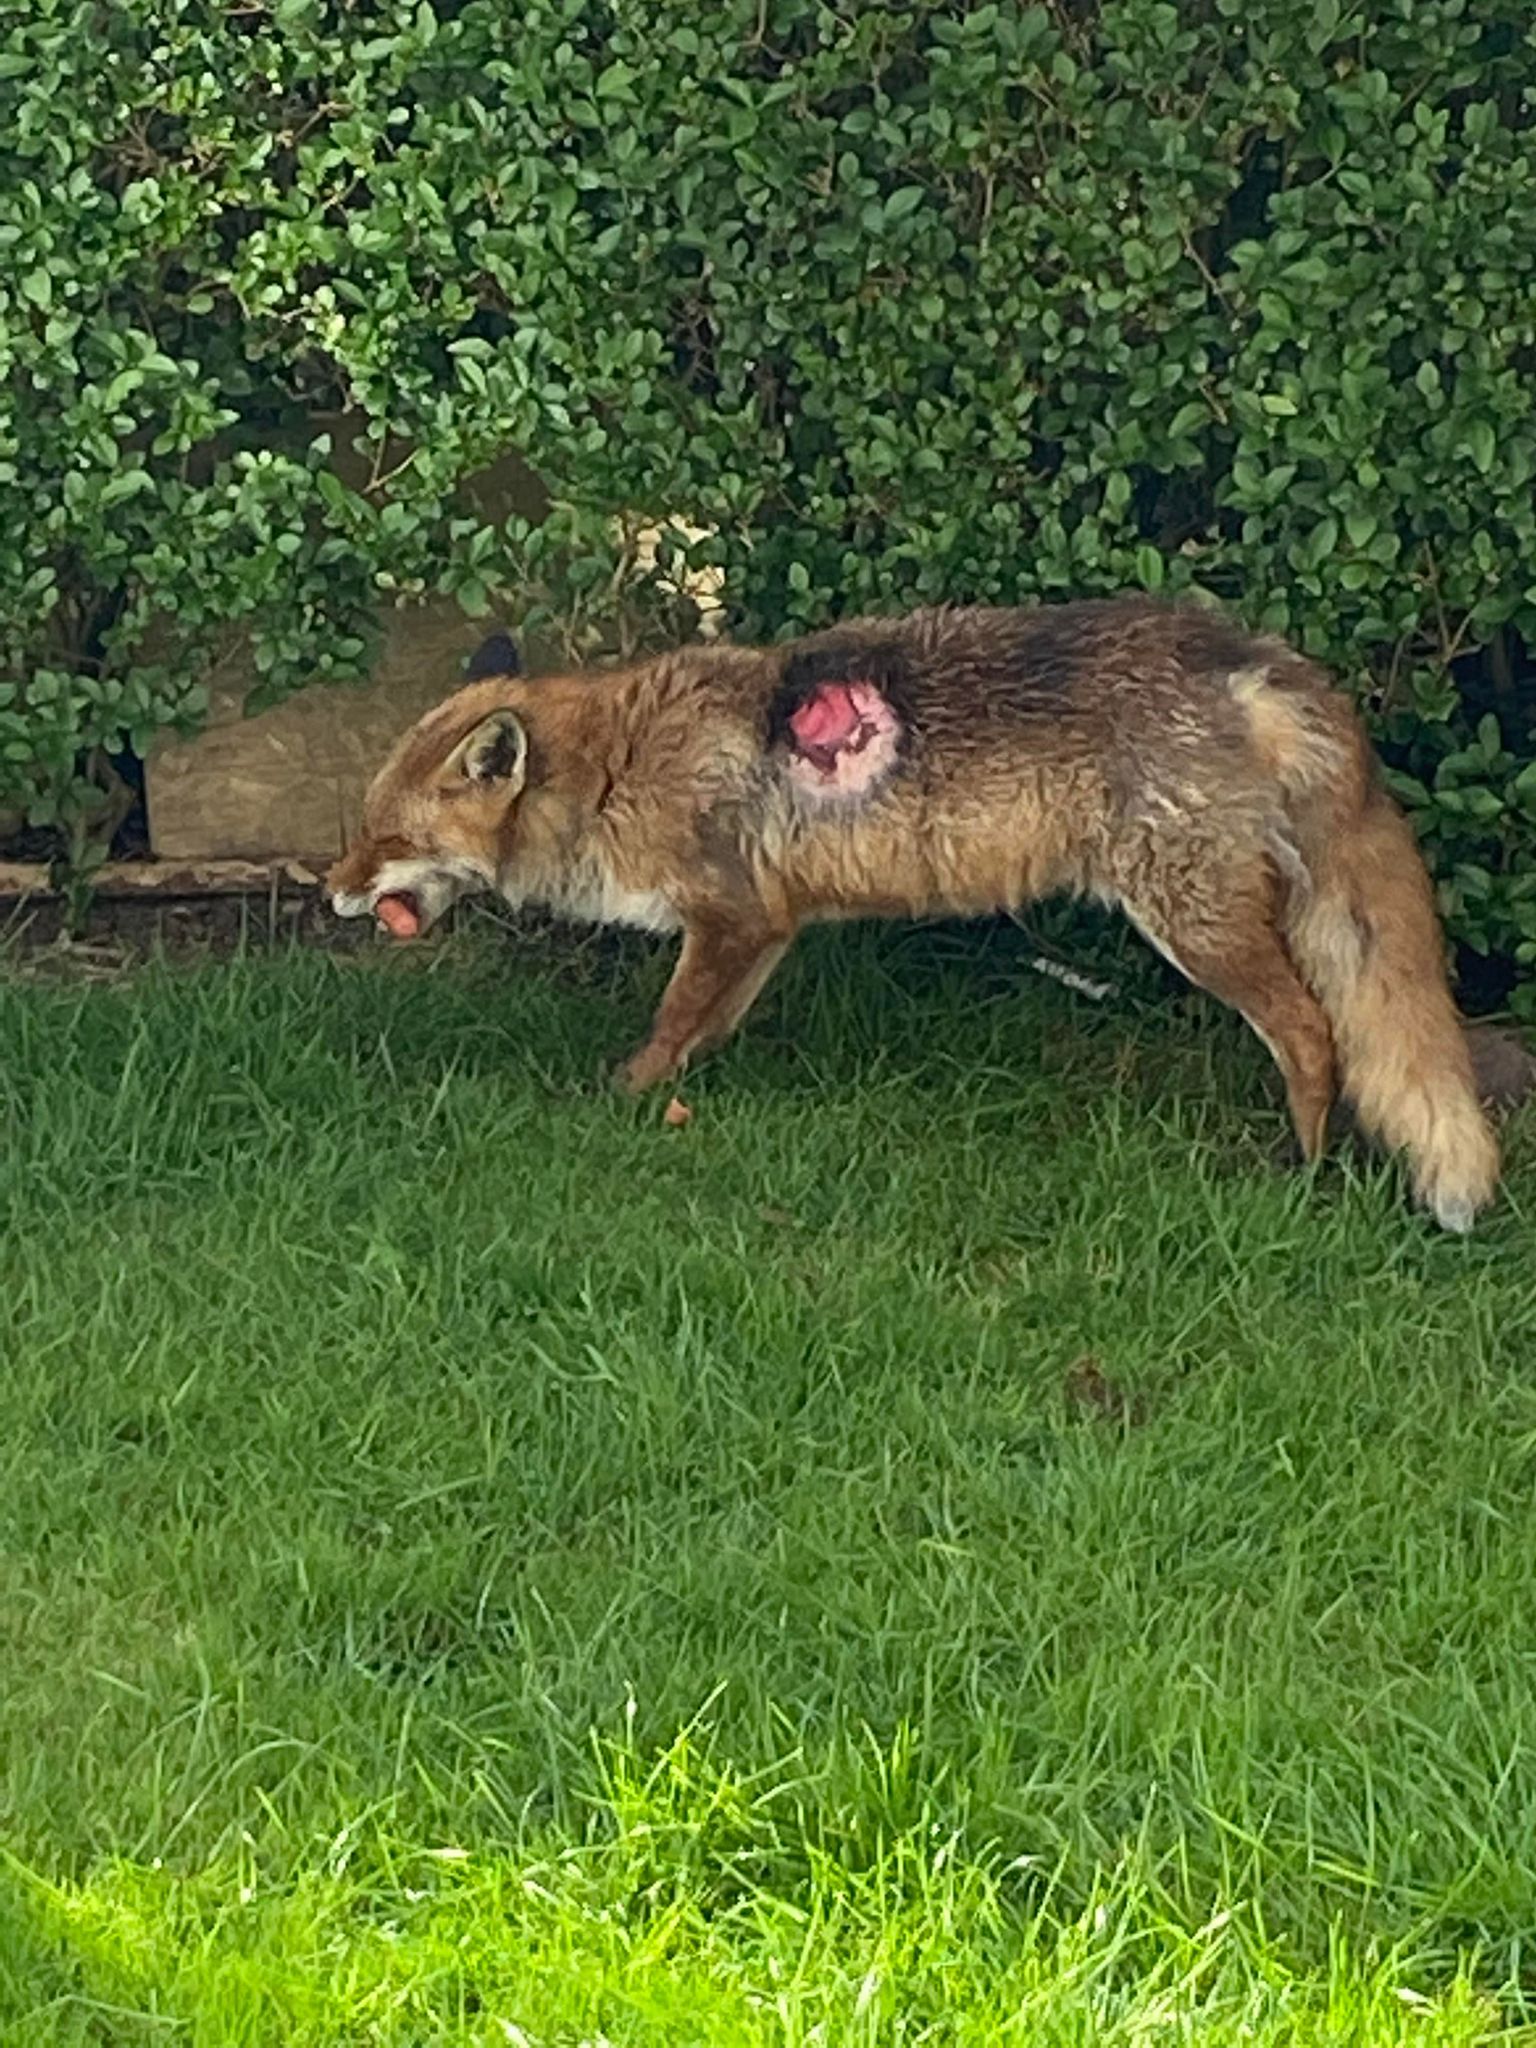 Injured fox with a large wound on its side.